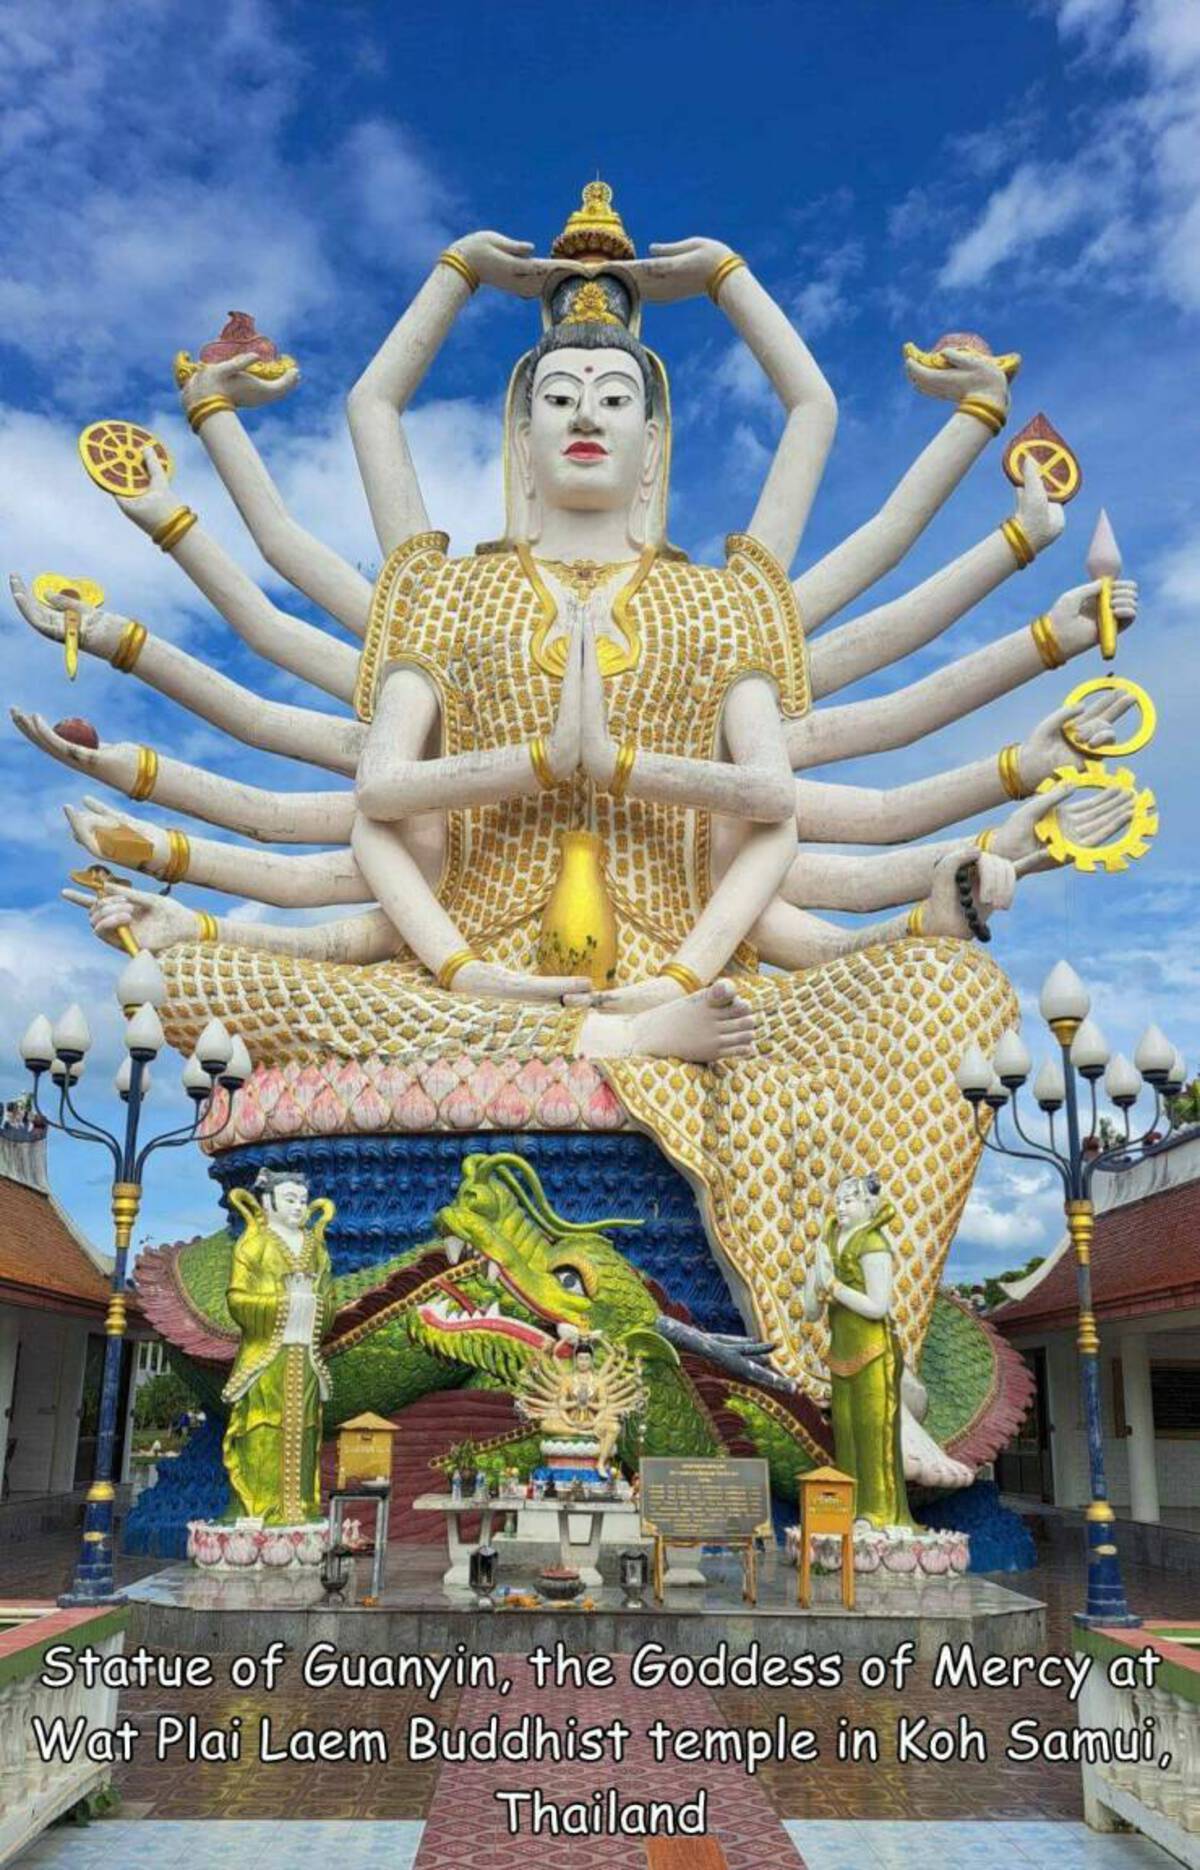 religion - Statue of Guanyin, the Goddess of Mercy at Wat Plai Laem Buddhist temple in Koh Samui, Thailand